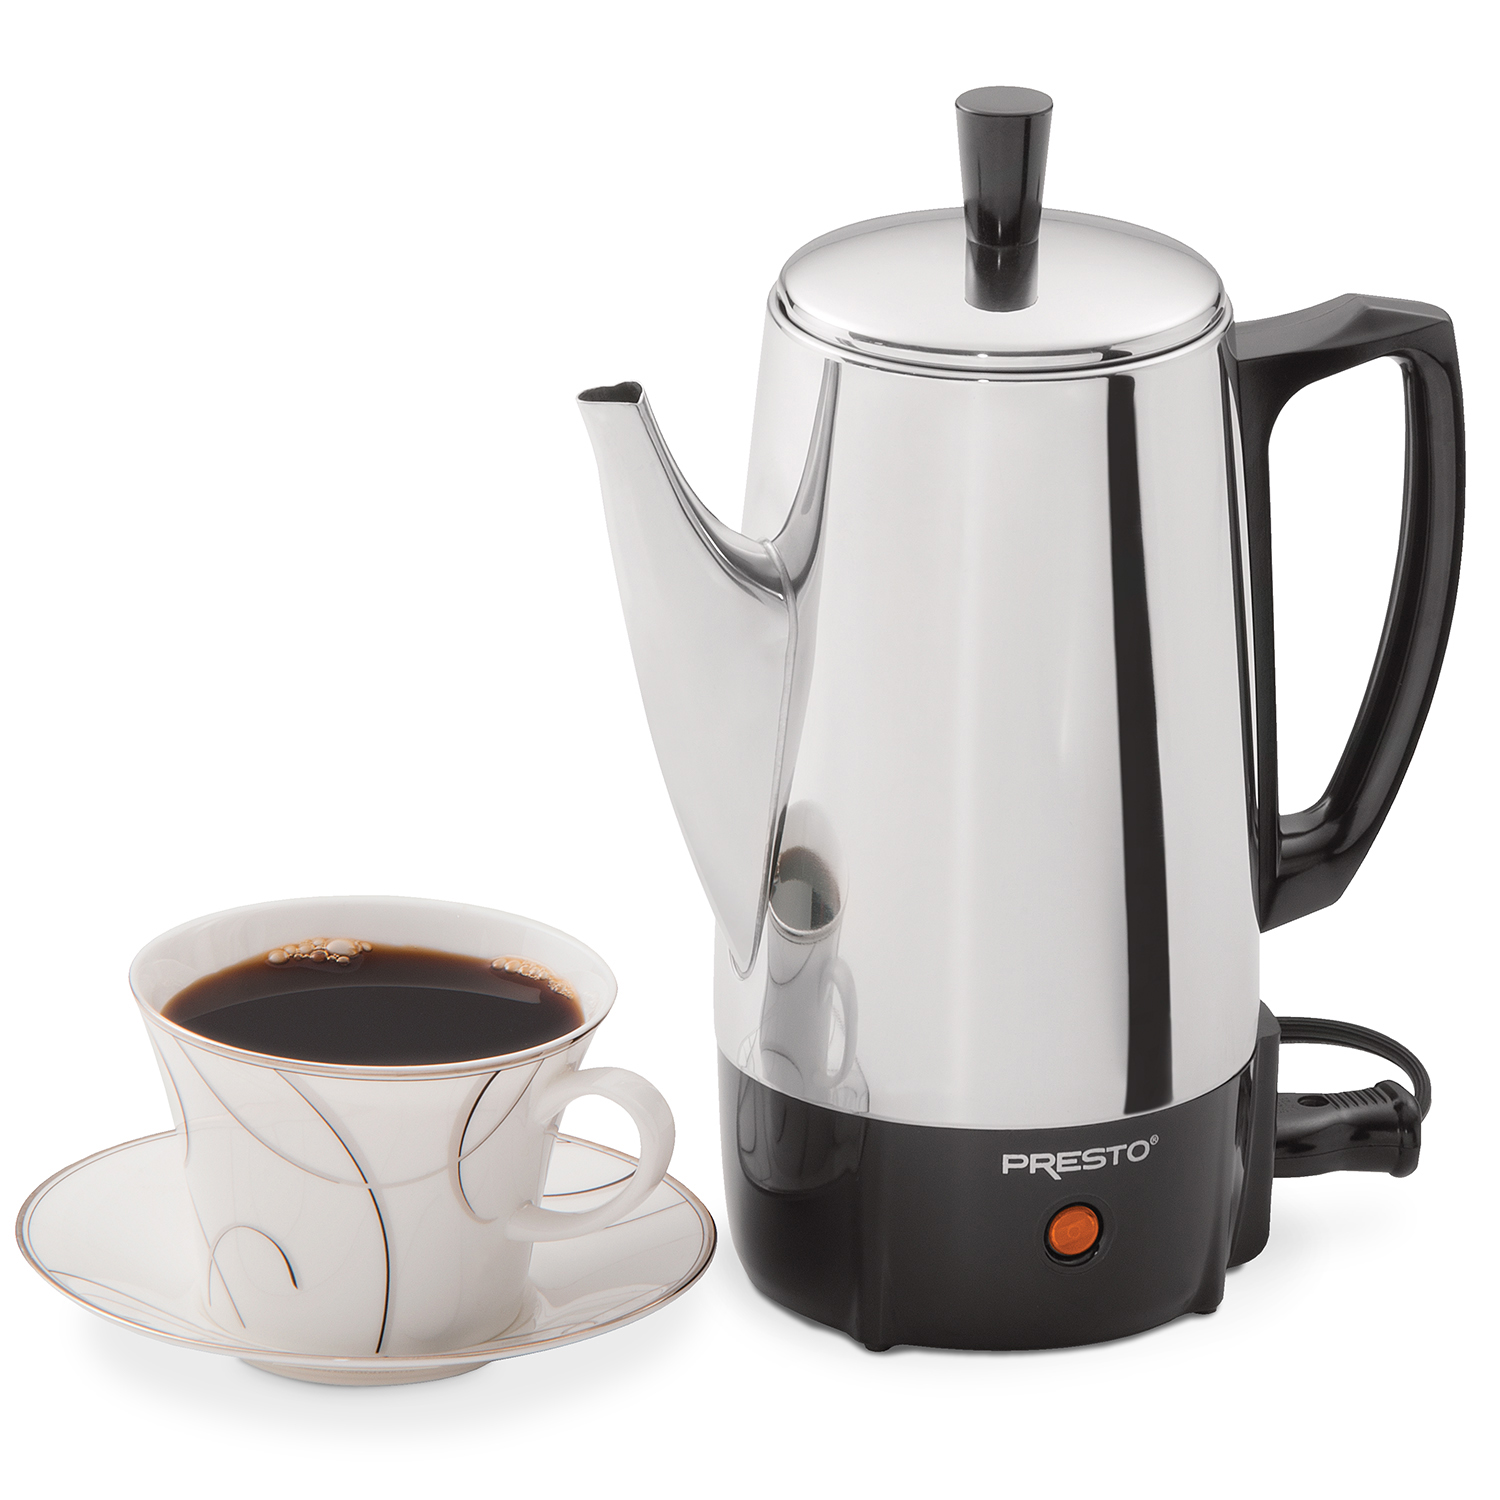 6-Cup Stainless Steel Coffee Maker - Coffee Makers - Presto® Presto Stainless Steel Coffee Maker